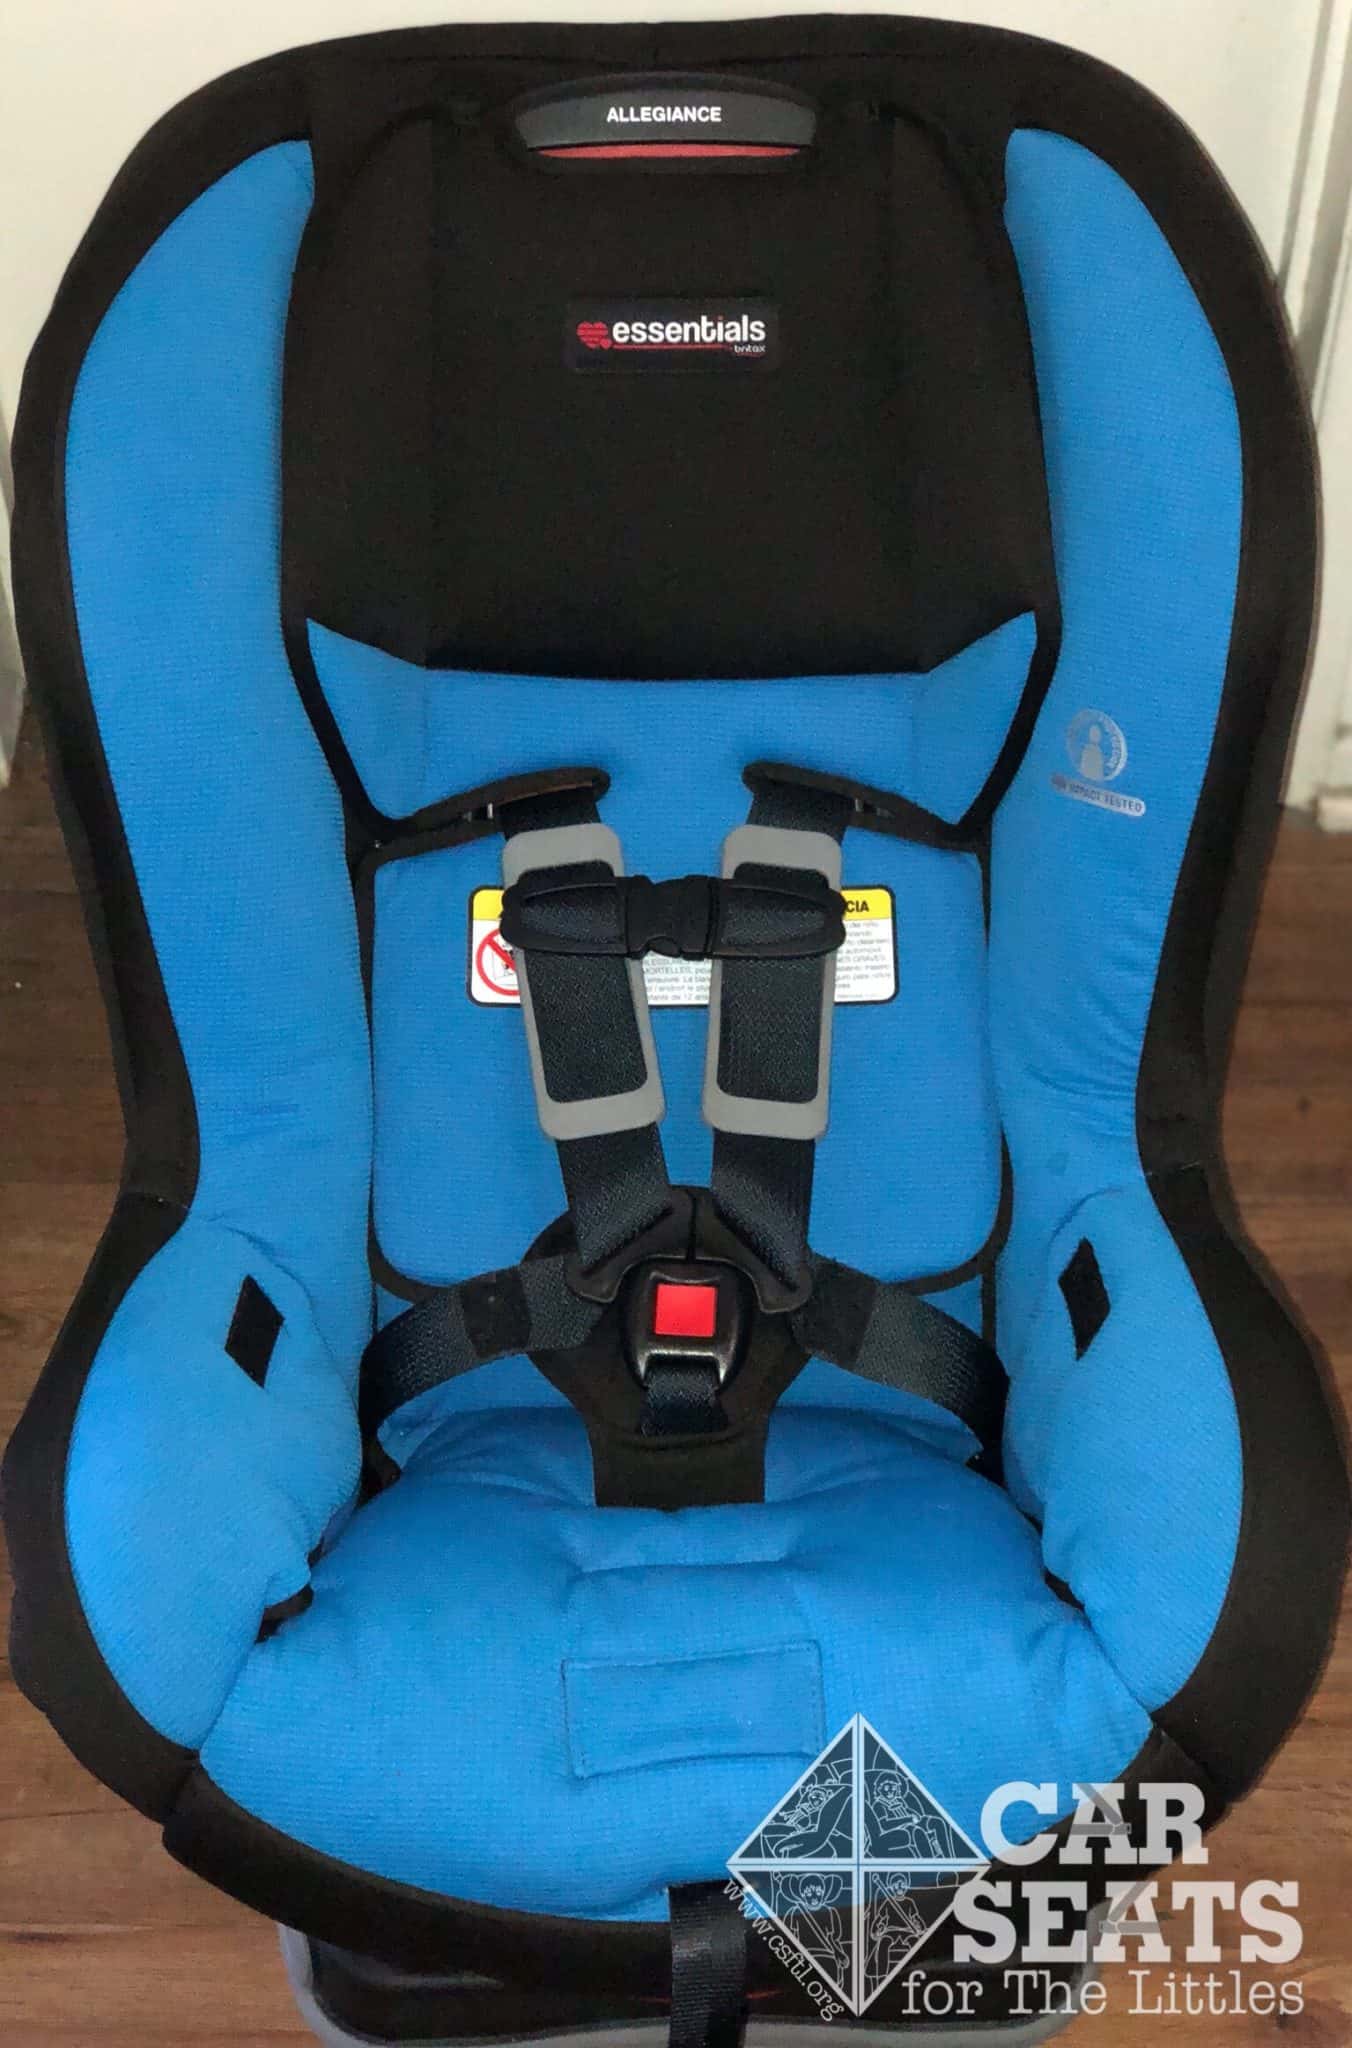 Allegiance Convertible Car Seats Review, How To Uninstall A Britax Car Seat